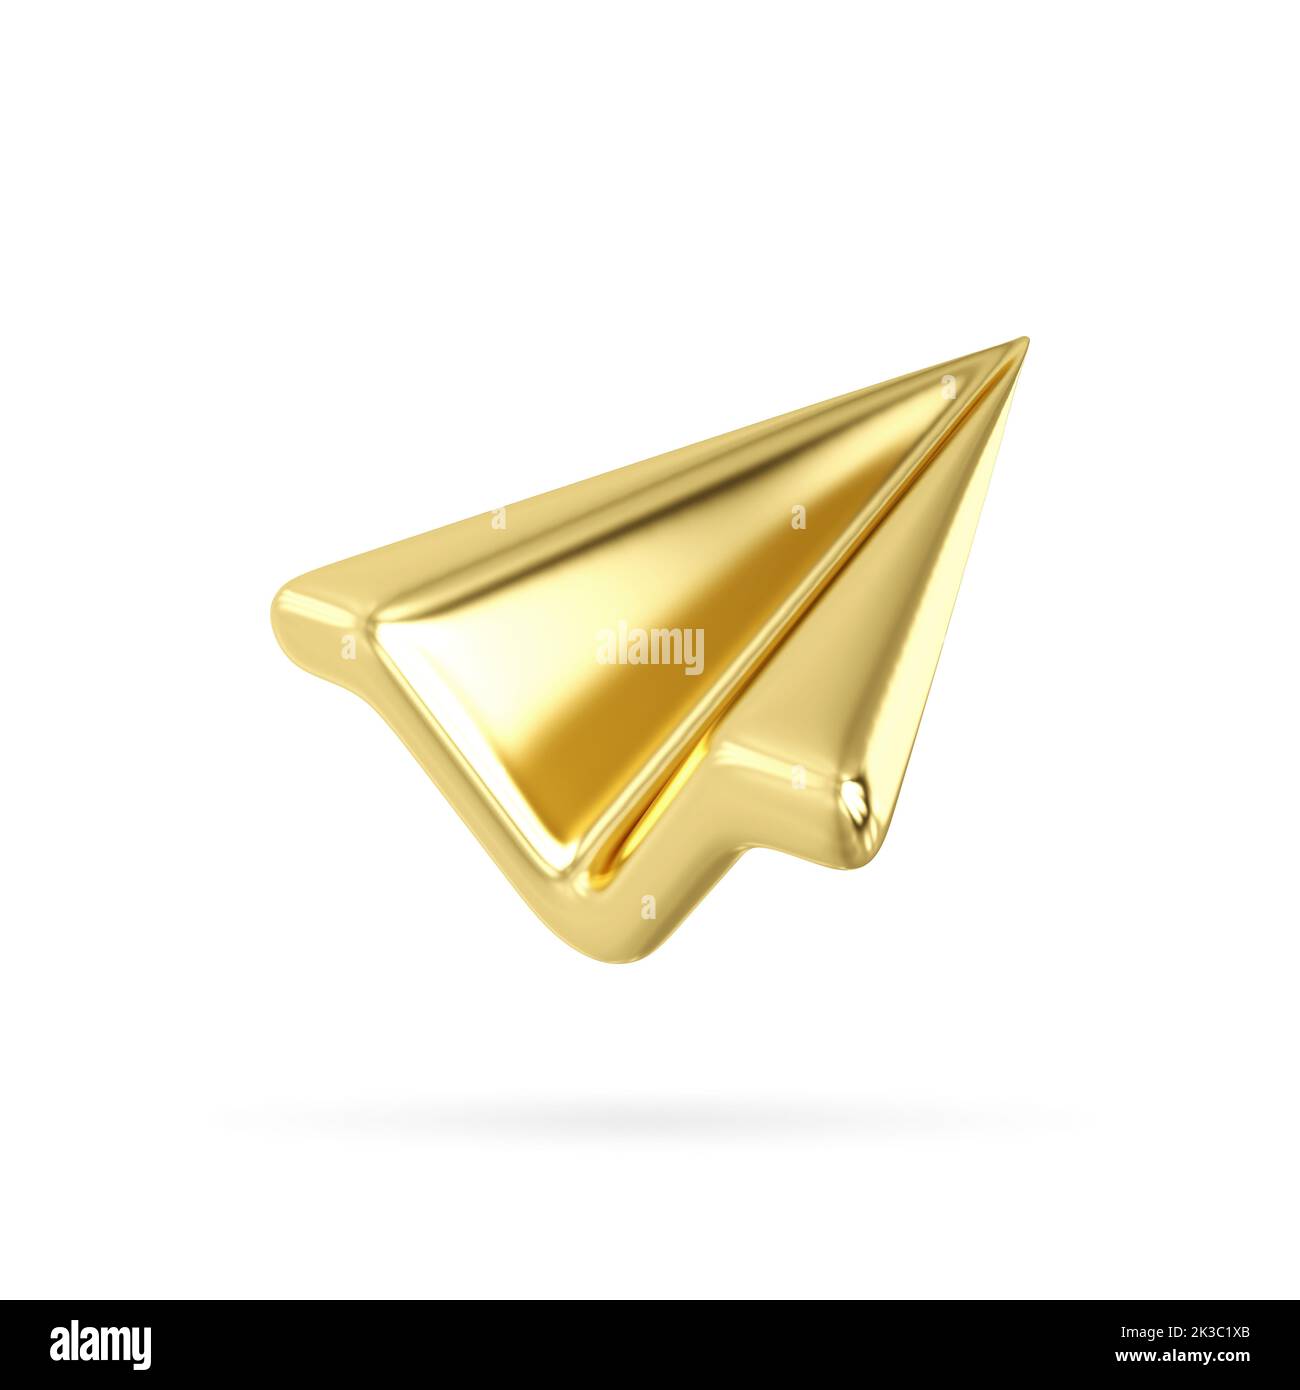 3D gold paper plane. Send email or message concept. Online social media. Realistic design illustration isolated on white background. 3d send icon .3D Stock Photo